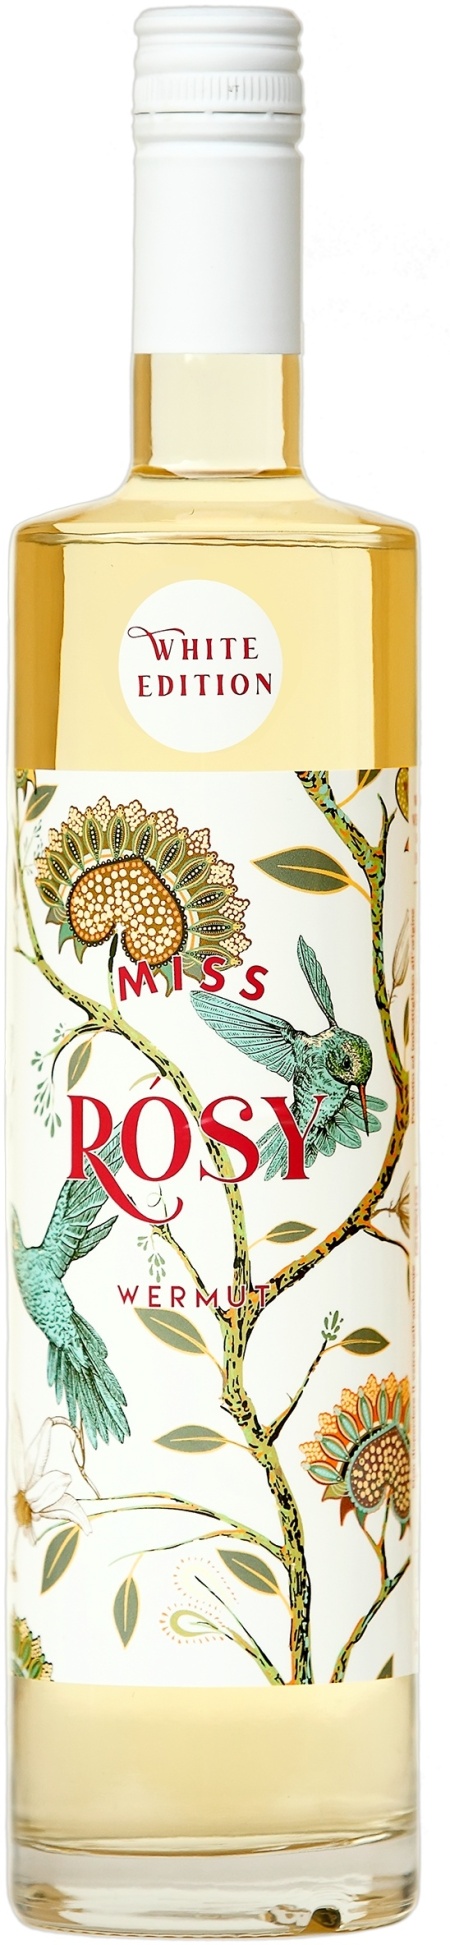 miss-rosy-white-edition-